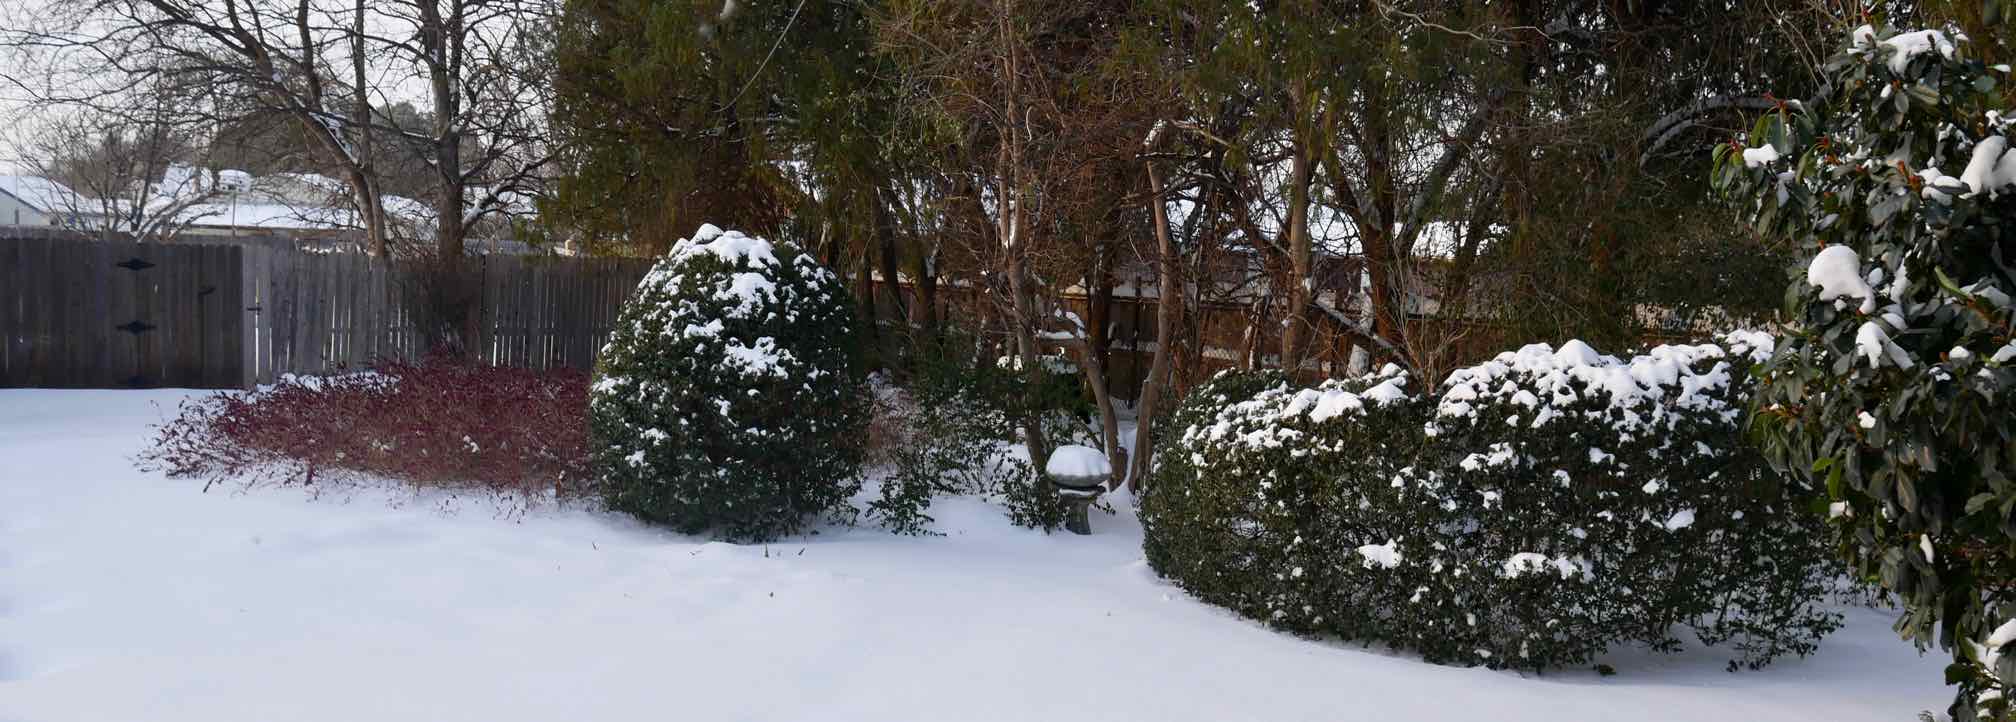 snow on shrubs, trees and ground